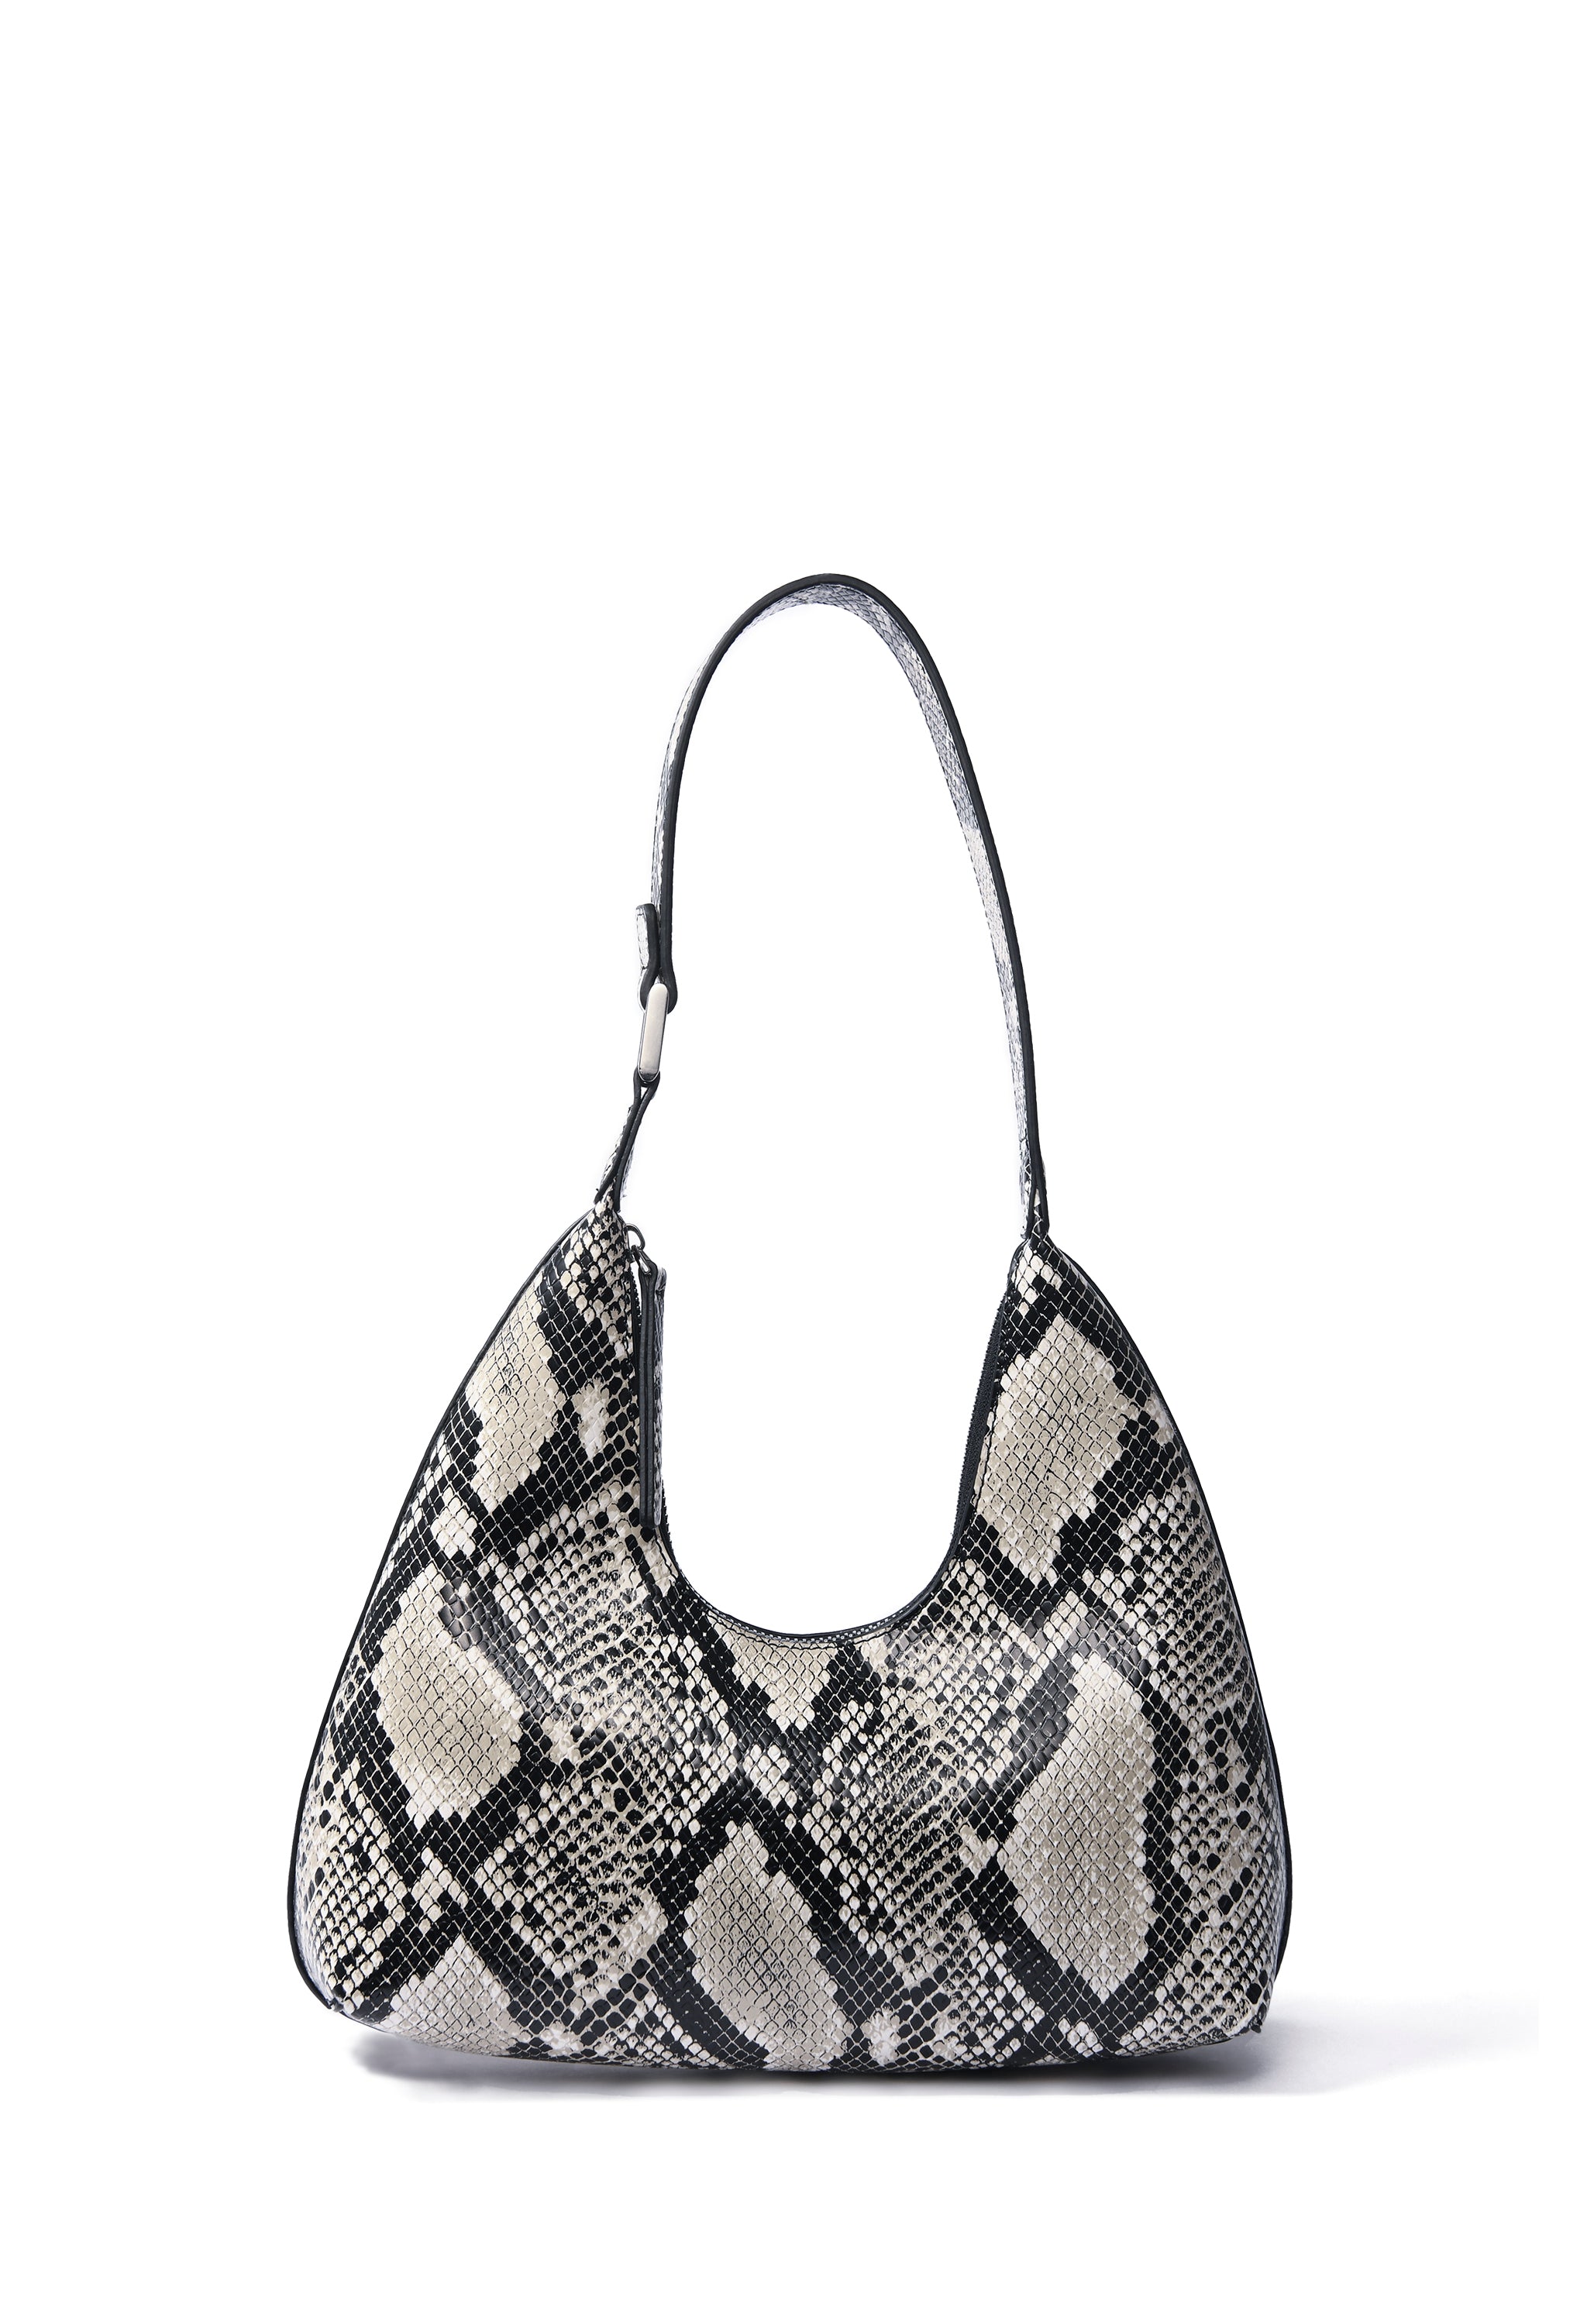 Alexia Bag in smooth leather, Snake